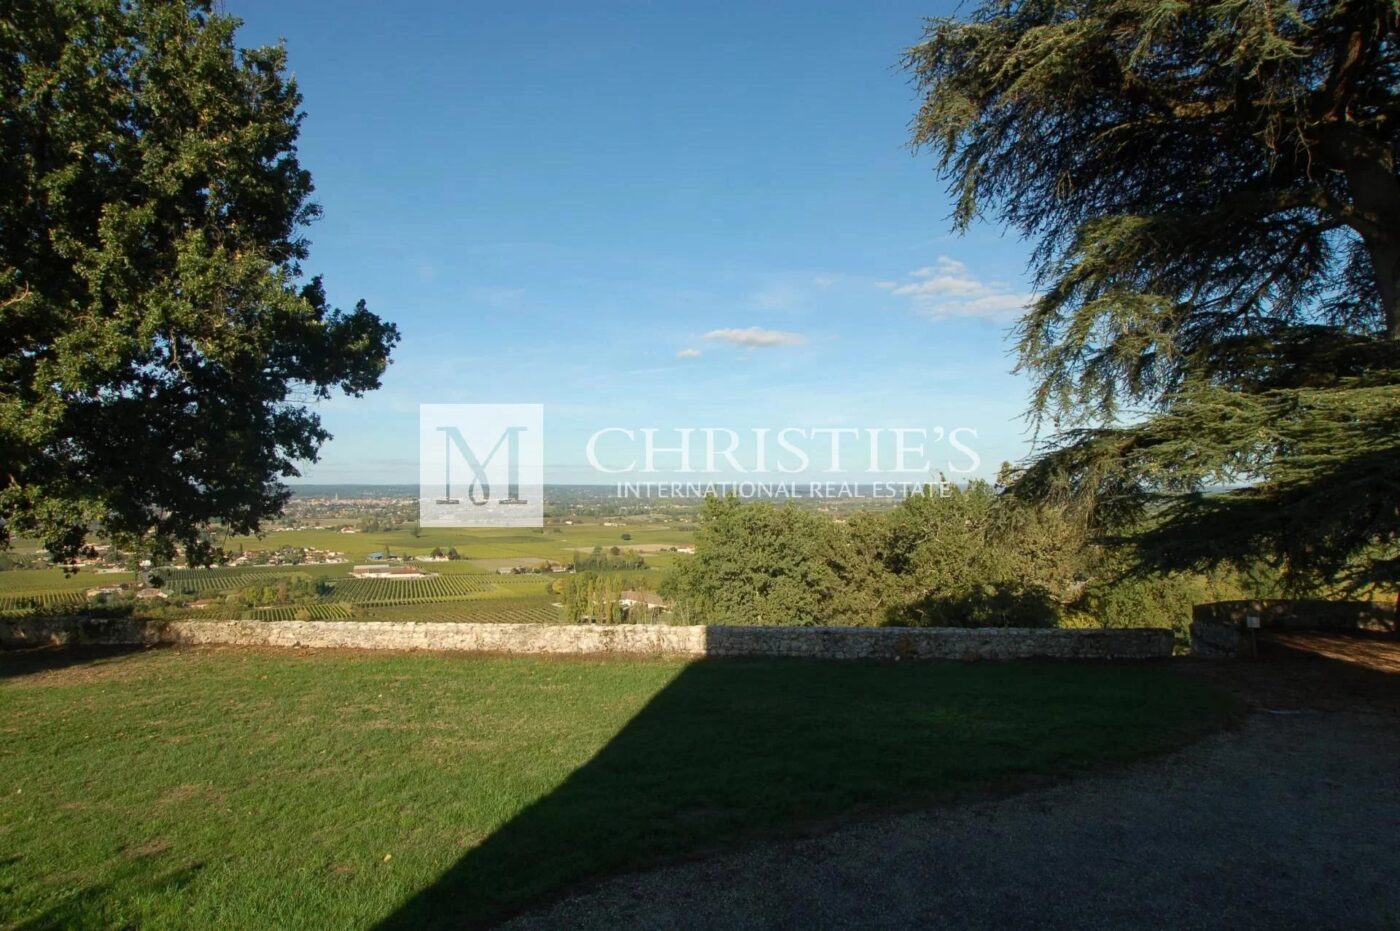 Bergerac - Superb, well-kept property with over 60 ha  of organically grown vines